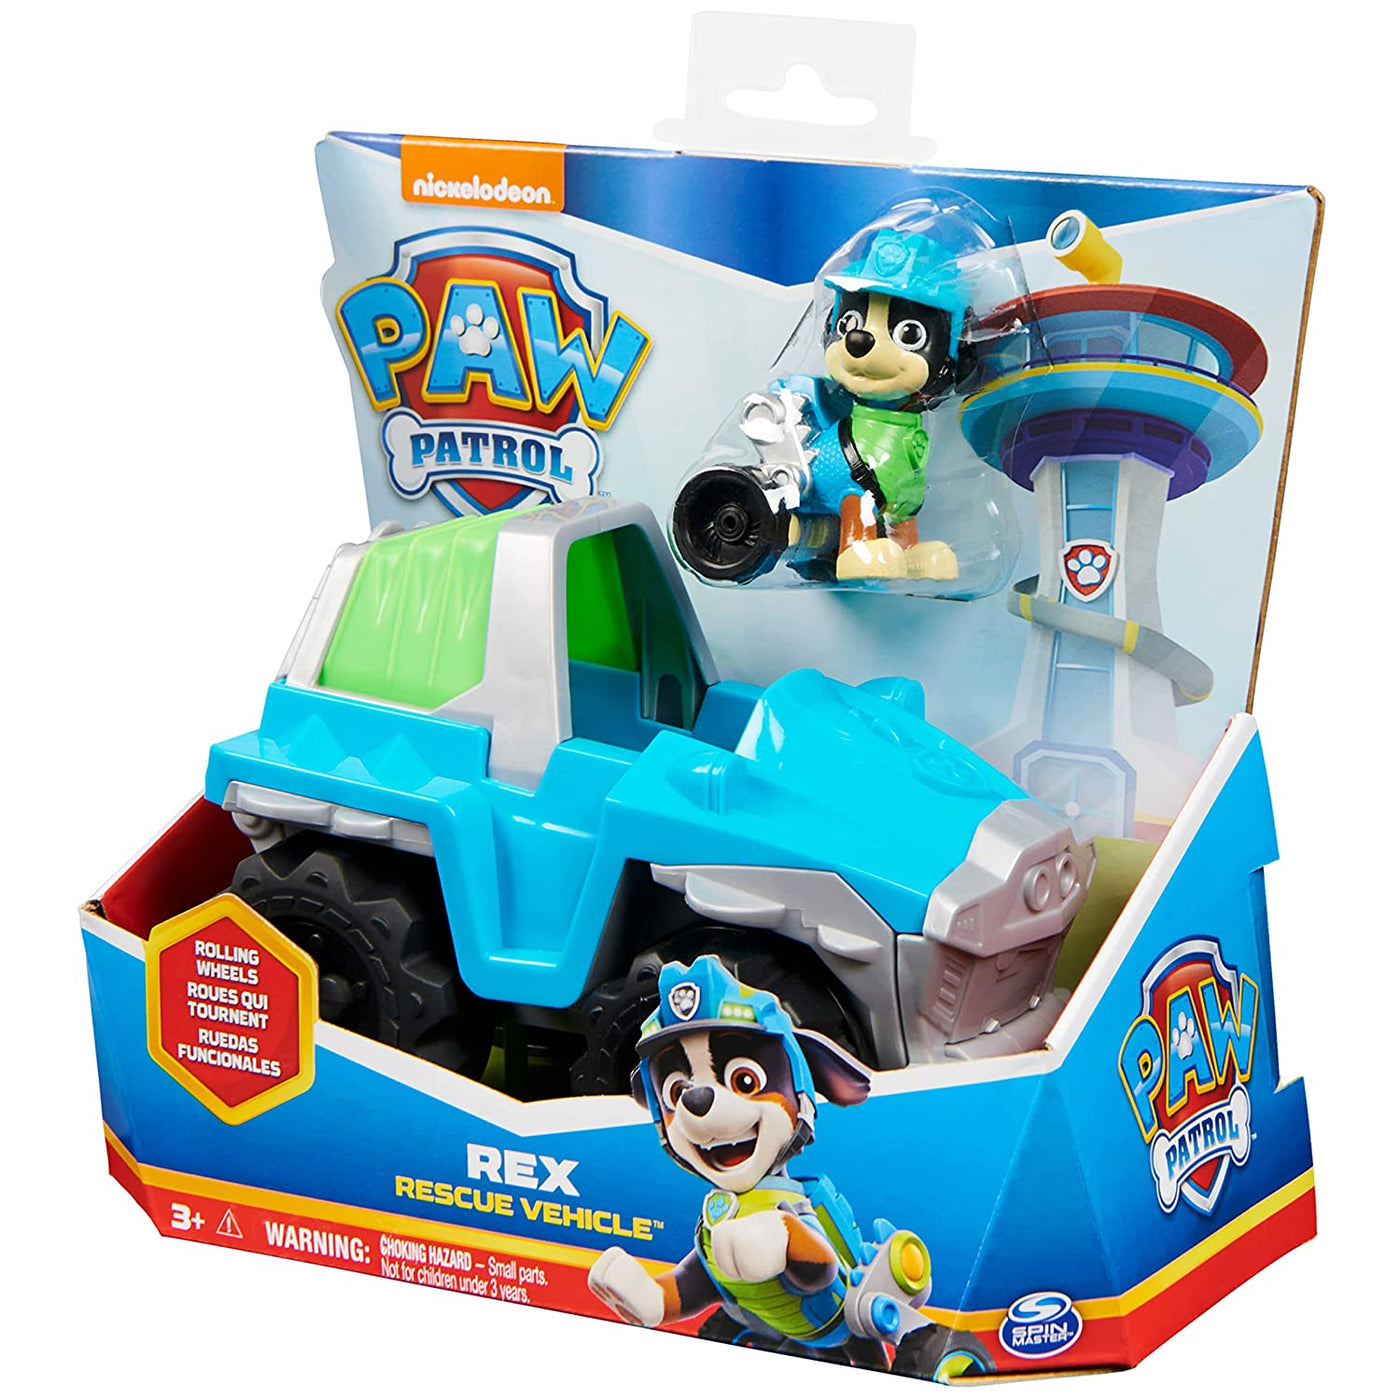 Rex Rescue Vehicle With Action Figure | Paw Patrol